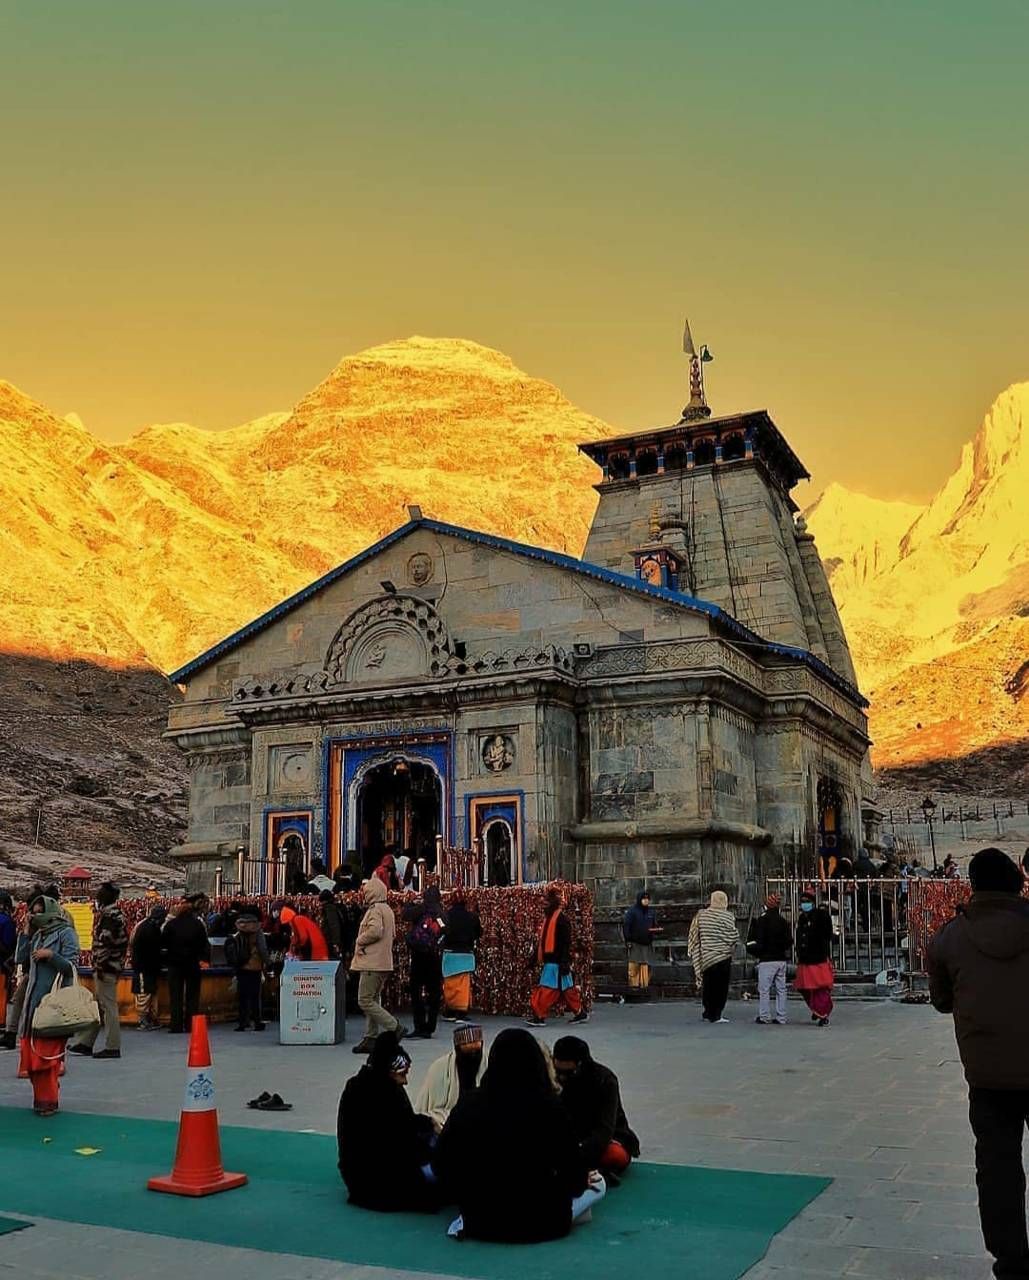 Download Kedarnath wallpaper by naanu_unknownuu now. Browse millions of. Temple photography, Wallpaper image hd, Beautiful nature picture